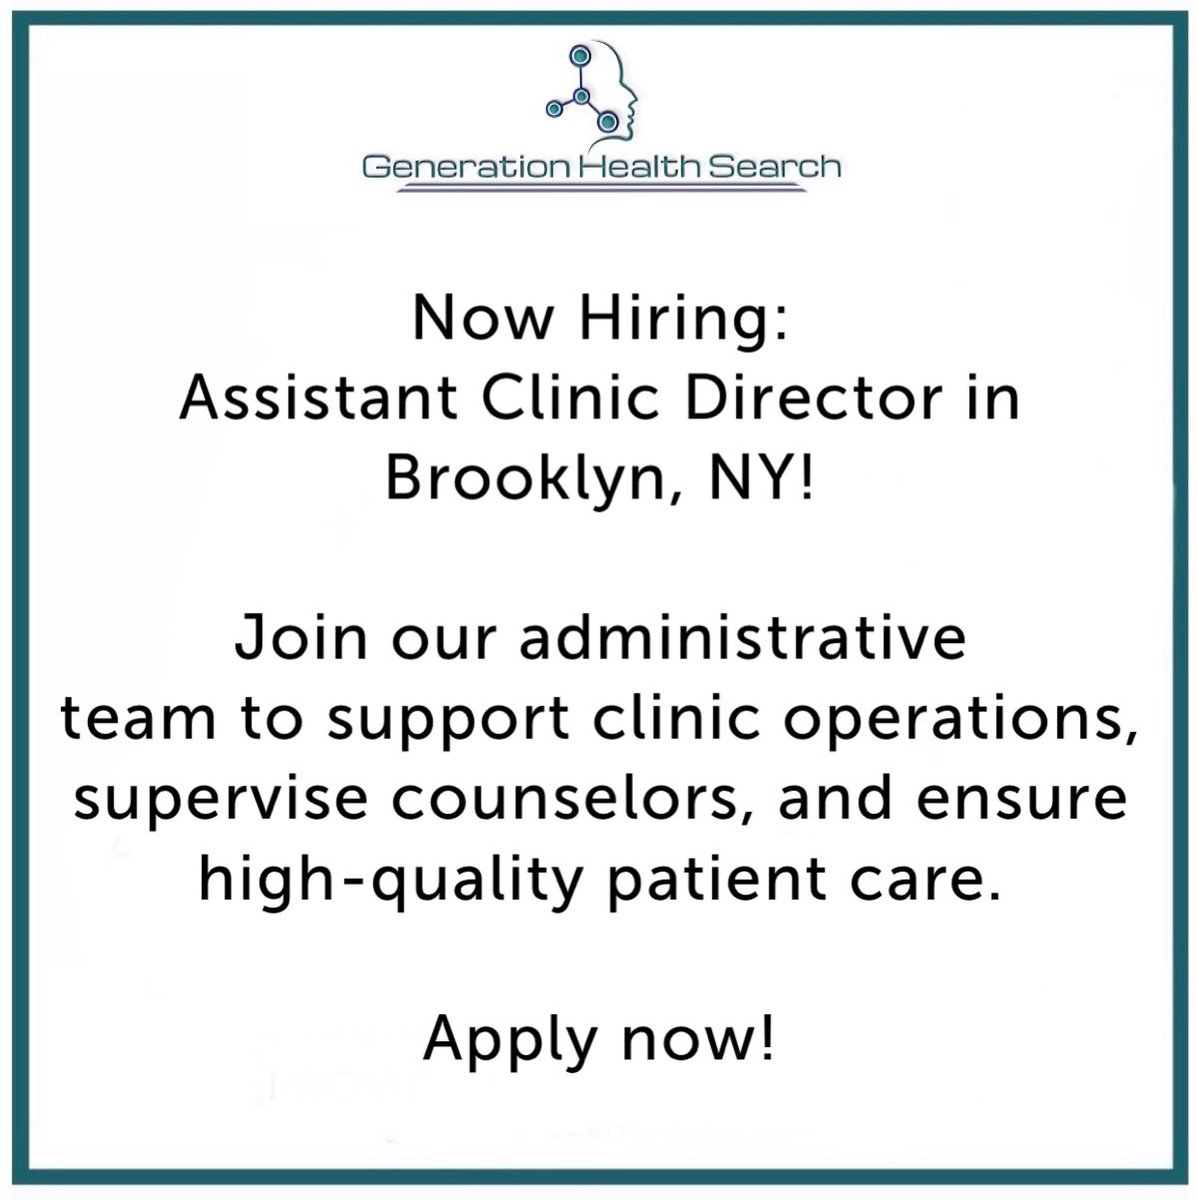 Job Title: Assistant Clinic Director Qualifications: Licensed Clinical Social Worker required 3 years post-Masters Degree experience in mental health setting Minimum 2 years experience as counseling supervisor Vacation, personal, and sick leave Salary: $90,000 - $105,000